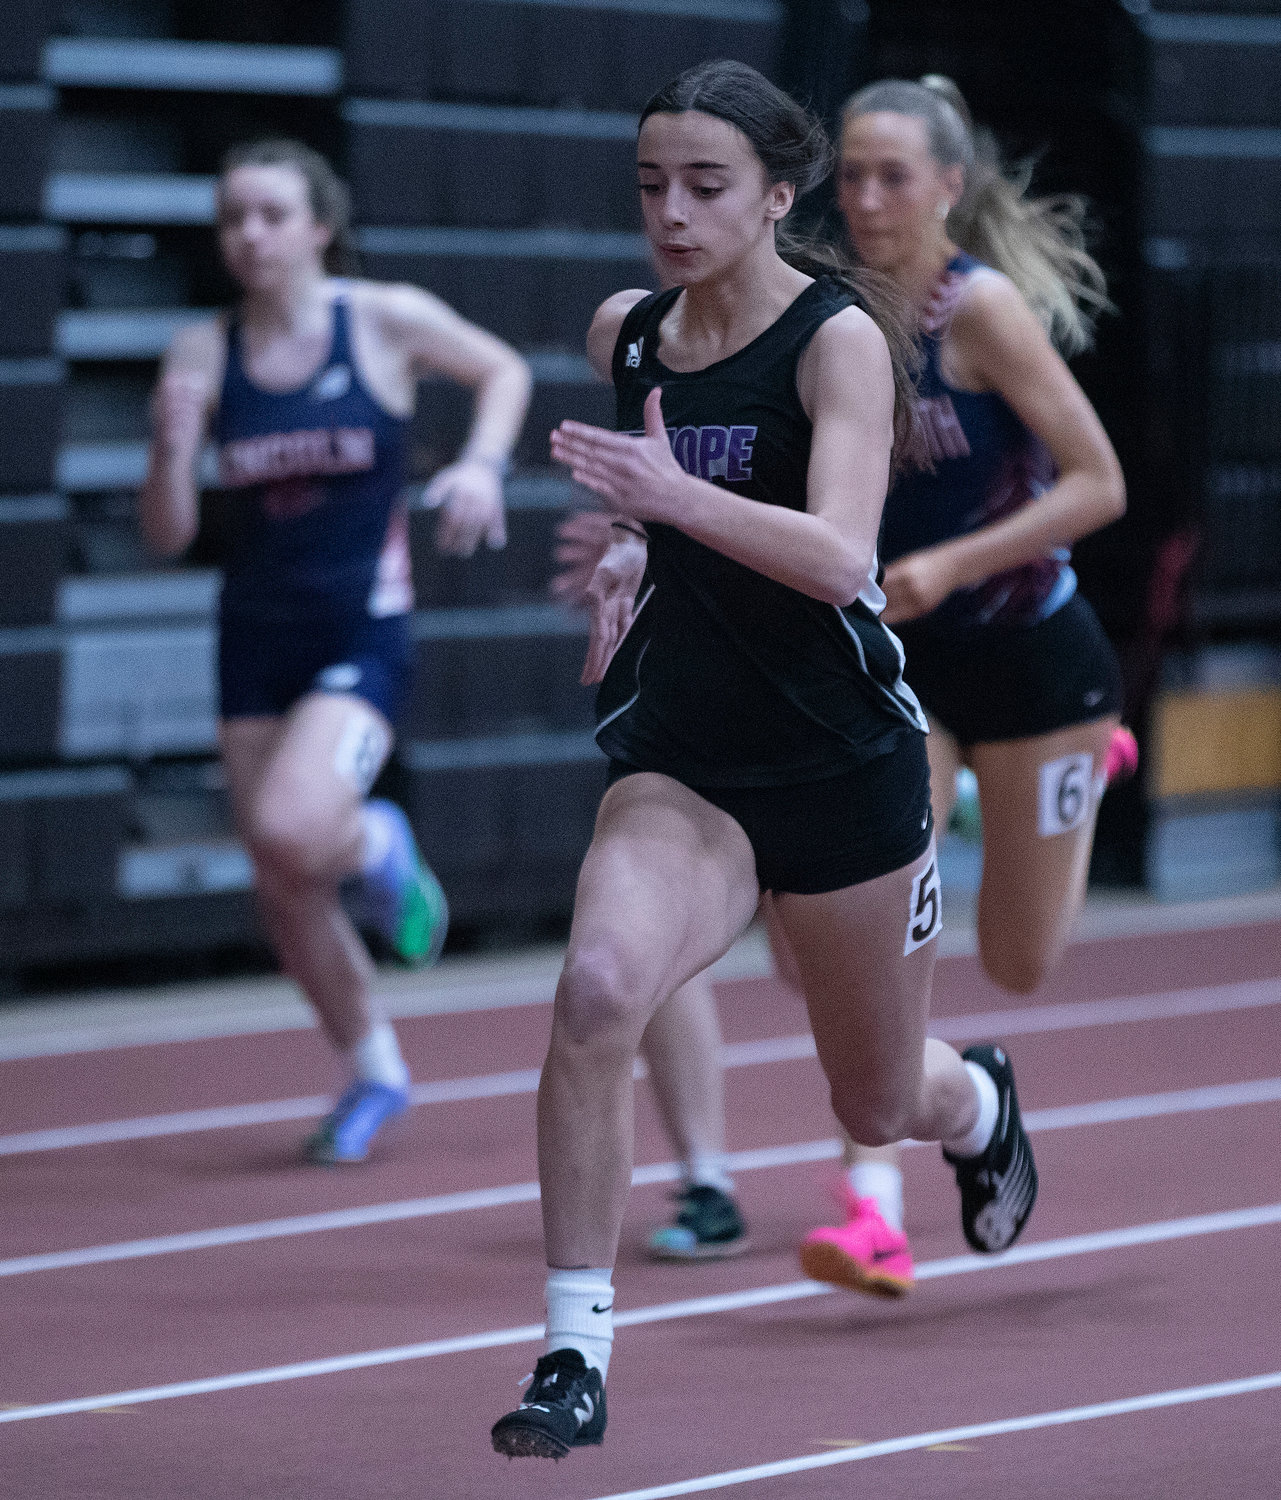 Thea Jackson, a sprinter, tallied 17 points and placed fourth in the 55-meter hurdles, second in the 55-meter run and fifth in the long jump.